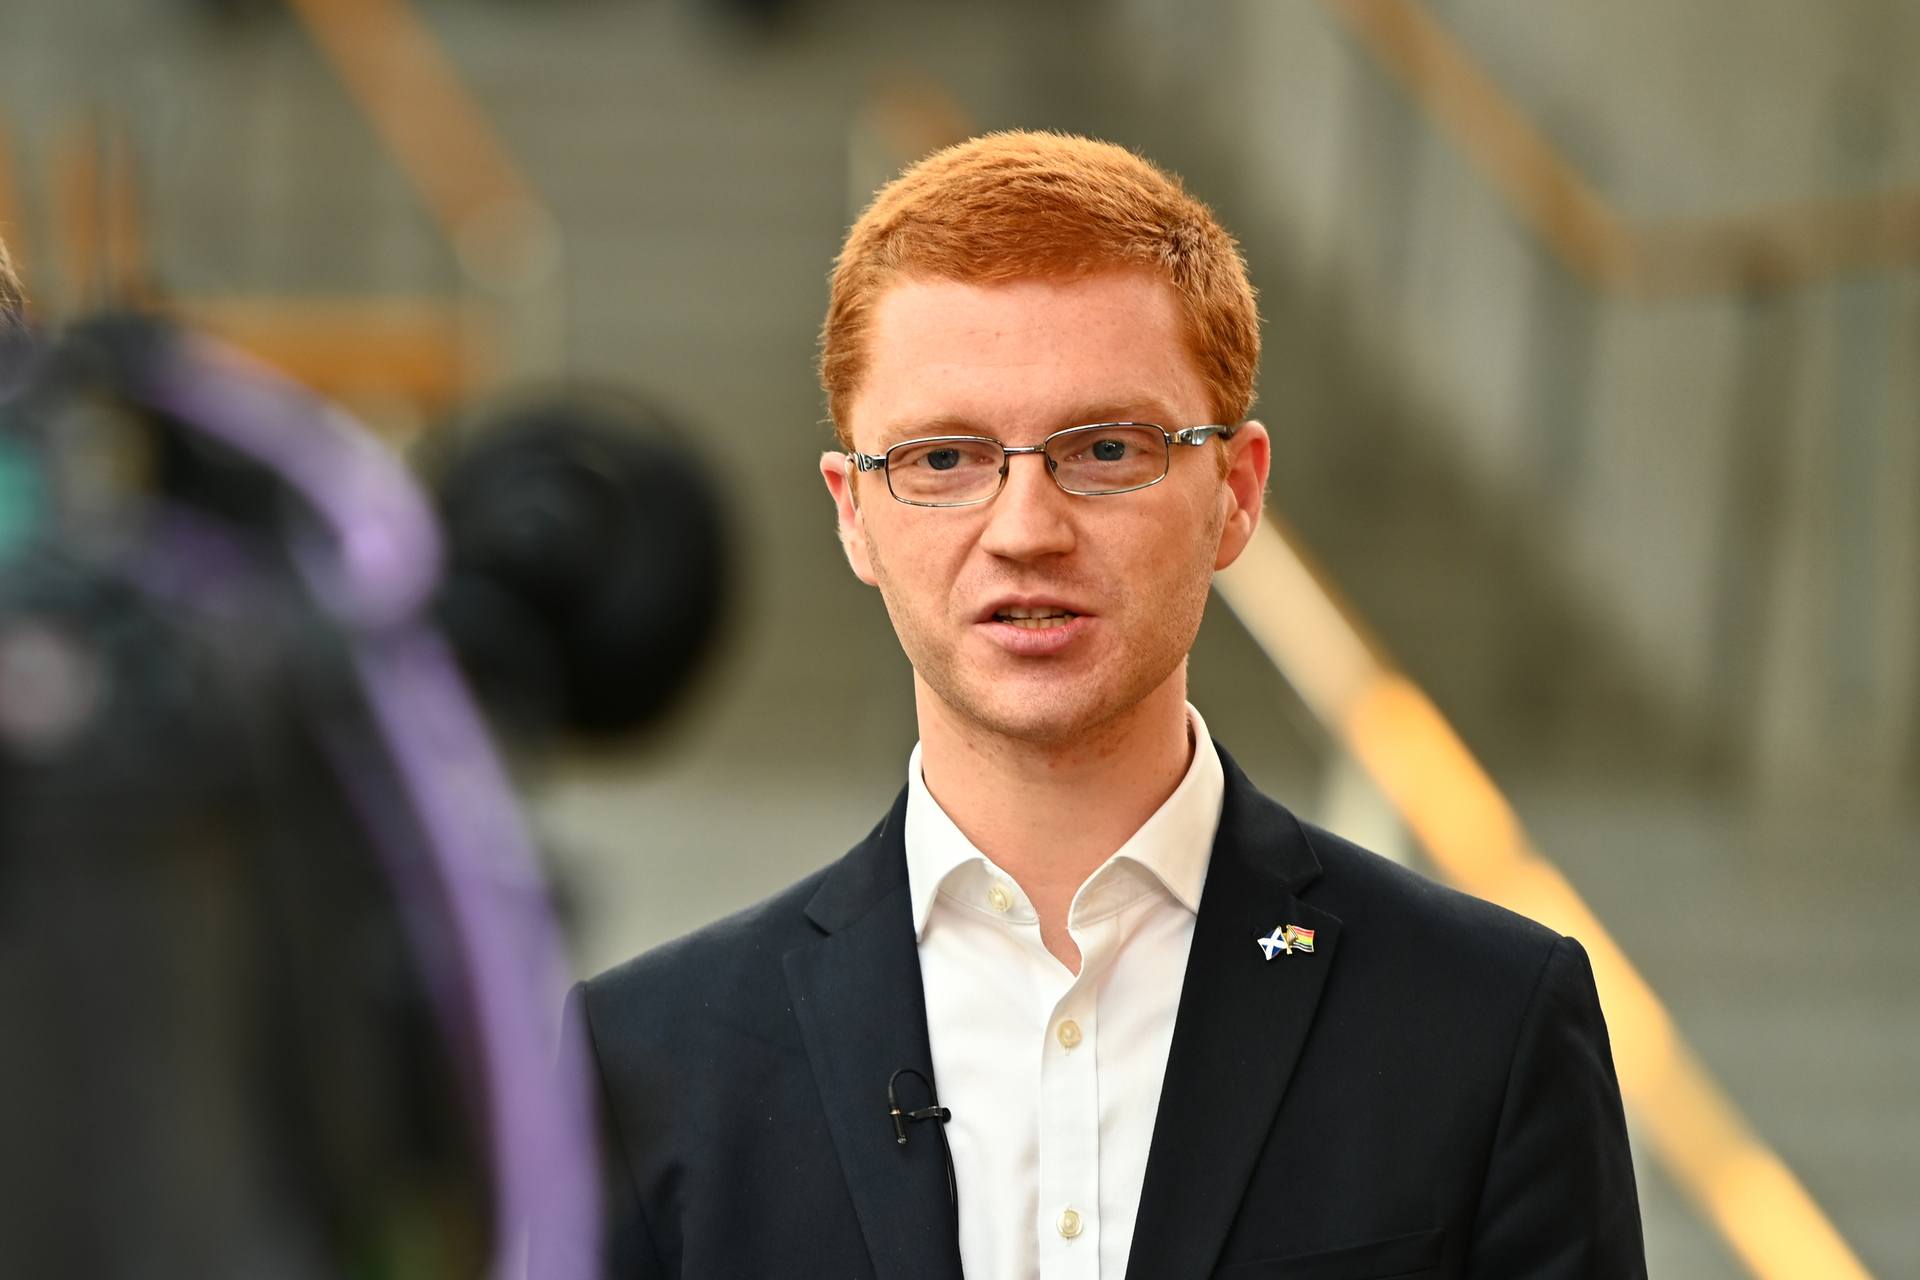 Ross Greer expressed concern about the council tax freeze.